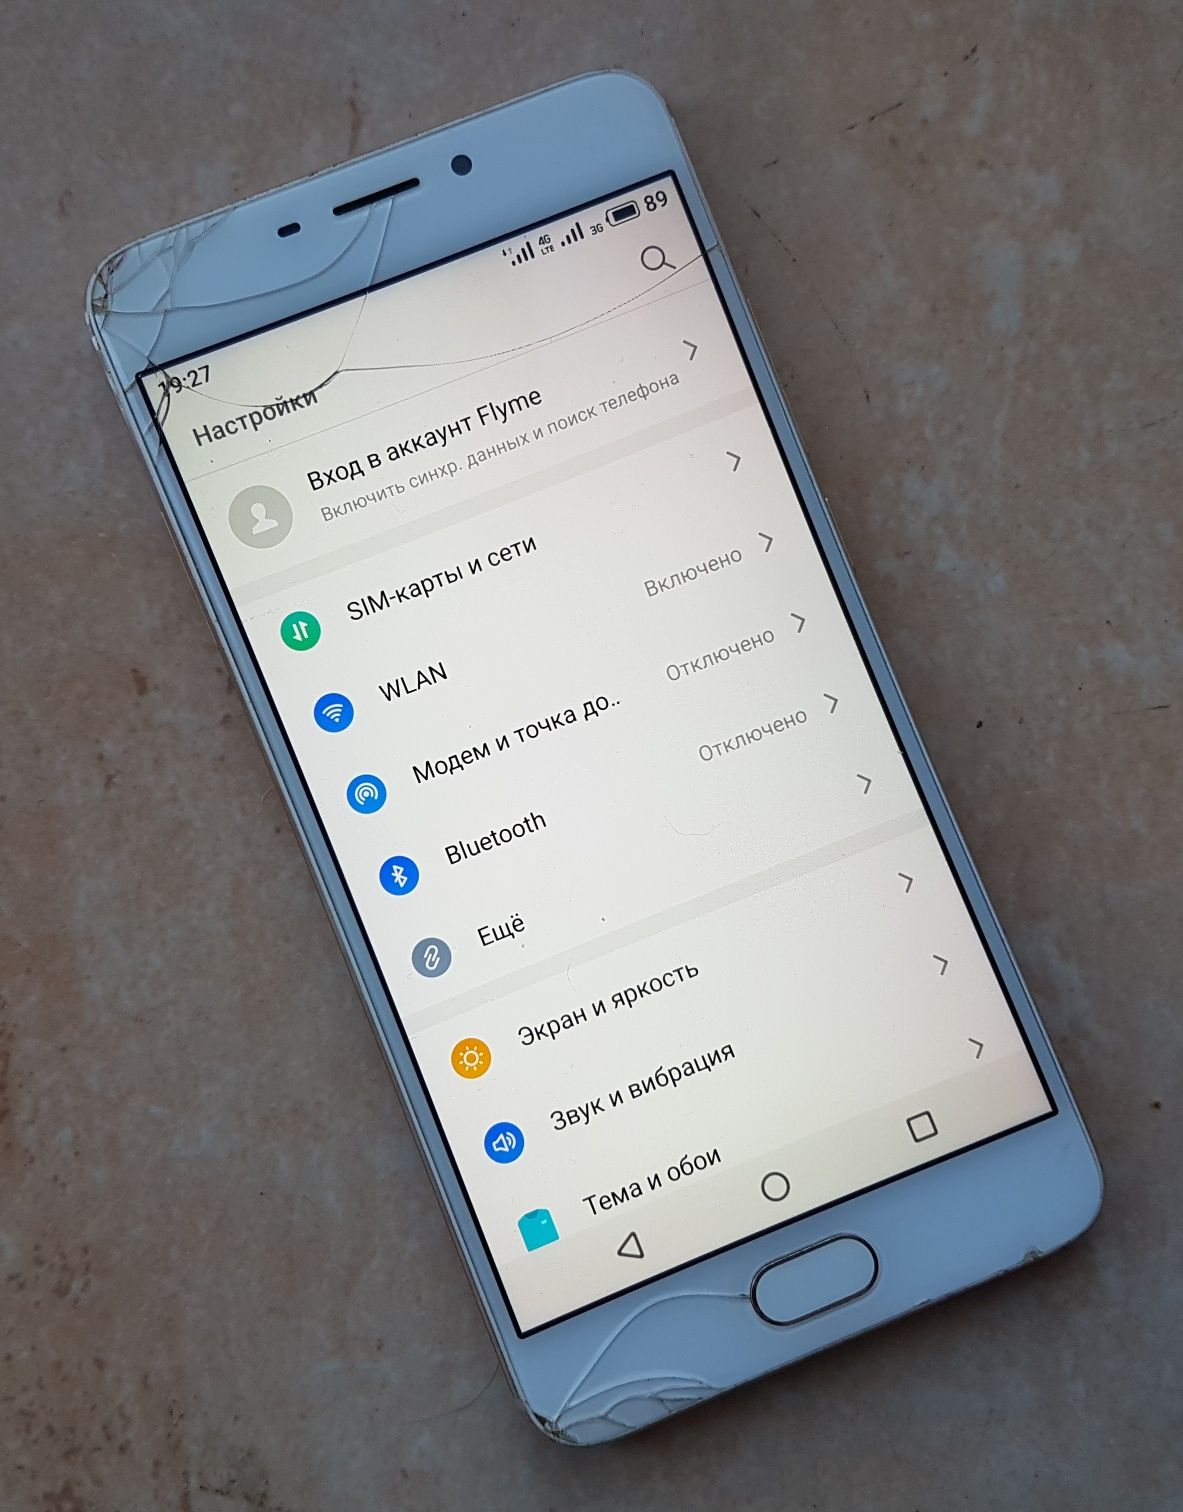 Meizu M5 Note, 2/16, android 7